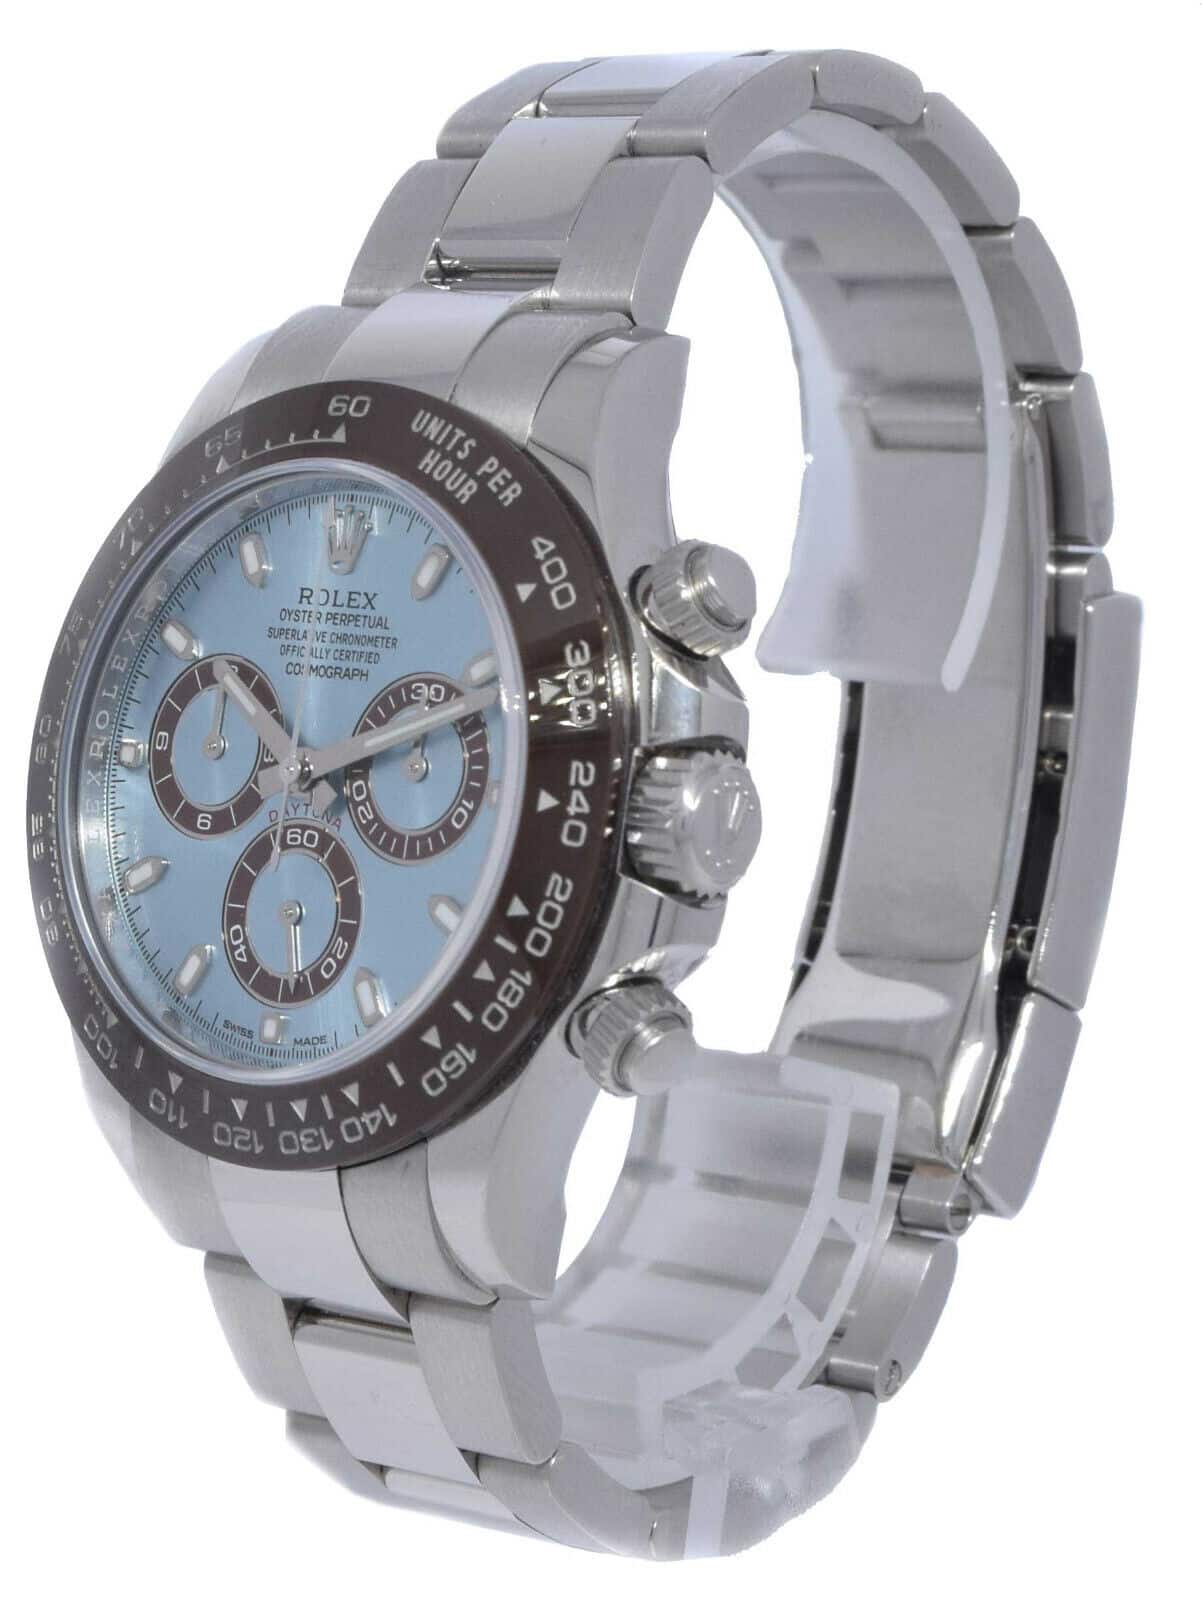 NEW Rolex Daytona Chronograph Platinum Ice Blue Dial Watch B/P '23' 116506  - Jewels in Time